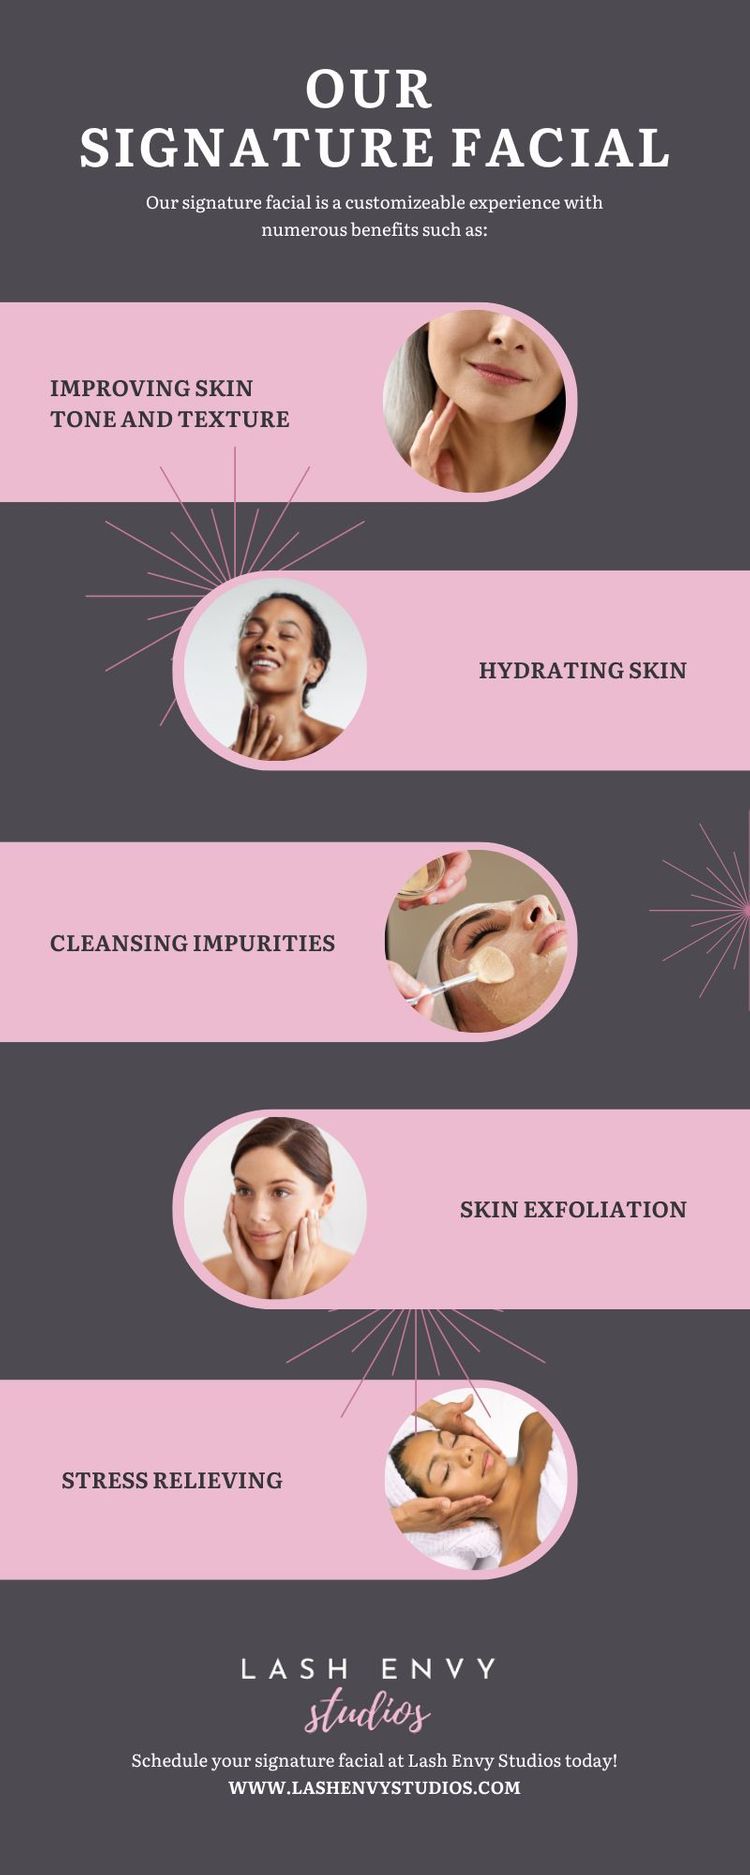 M17103 - Infographic - Our Signature Facial.jpg